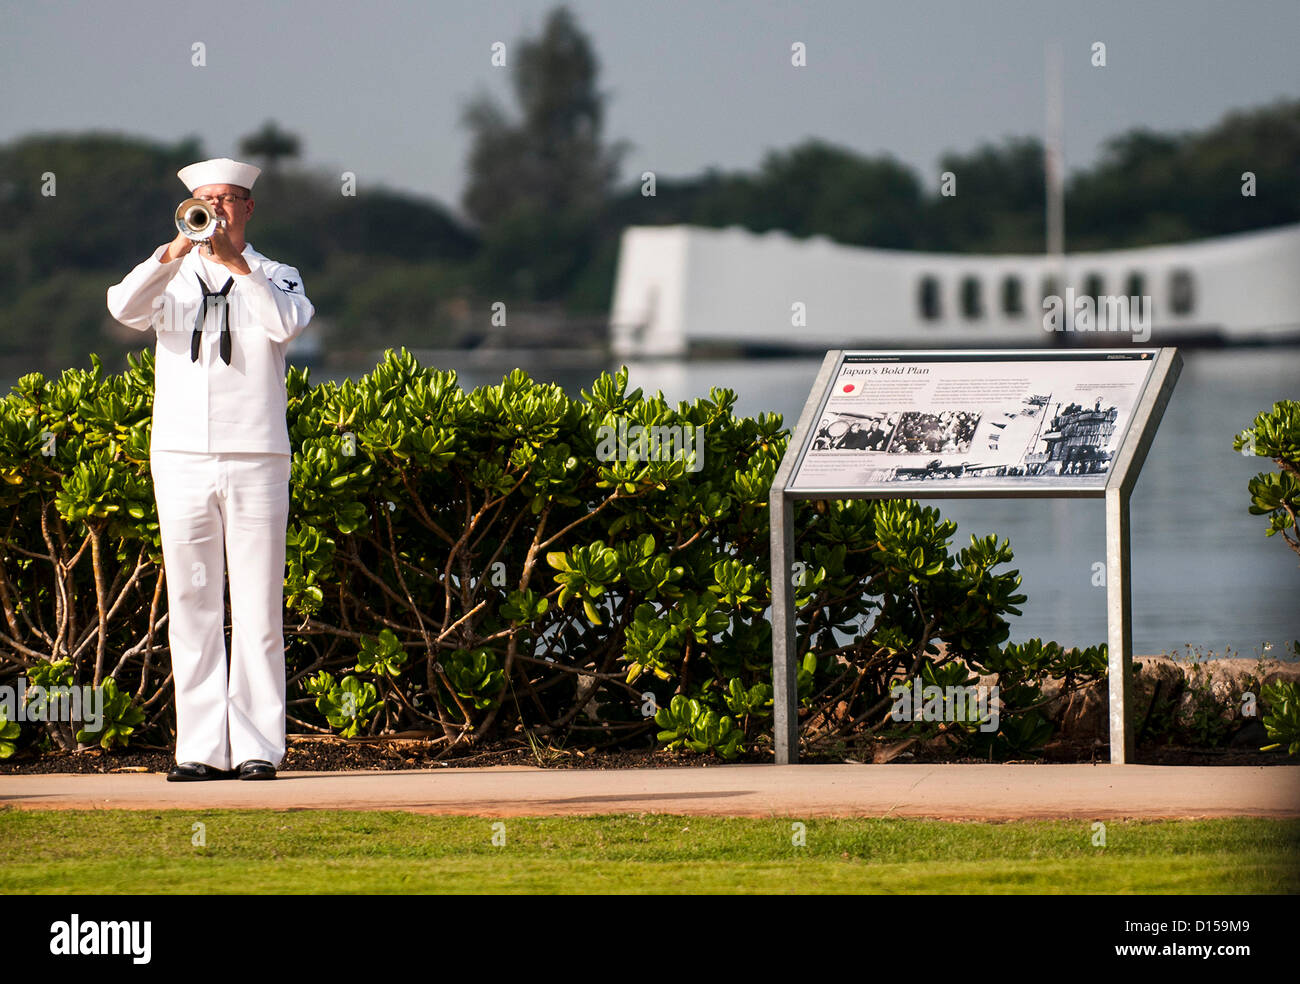 Peral Harbor, Hawaii, USA. 7th Dec, 2012. A Navy bugler plays Echo Taps at the 71st Anniversary Pearl Harbor Day Commemoration December 7, 2012 in Pearl Harbor, HI. The Navy base was attacked by Japanese forces on December 7, 1941. Stock Photo